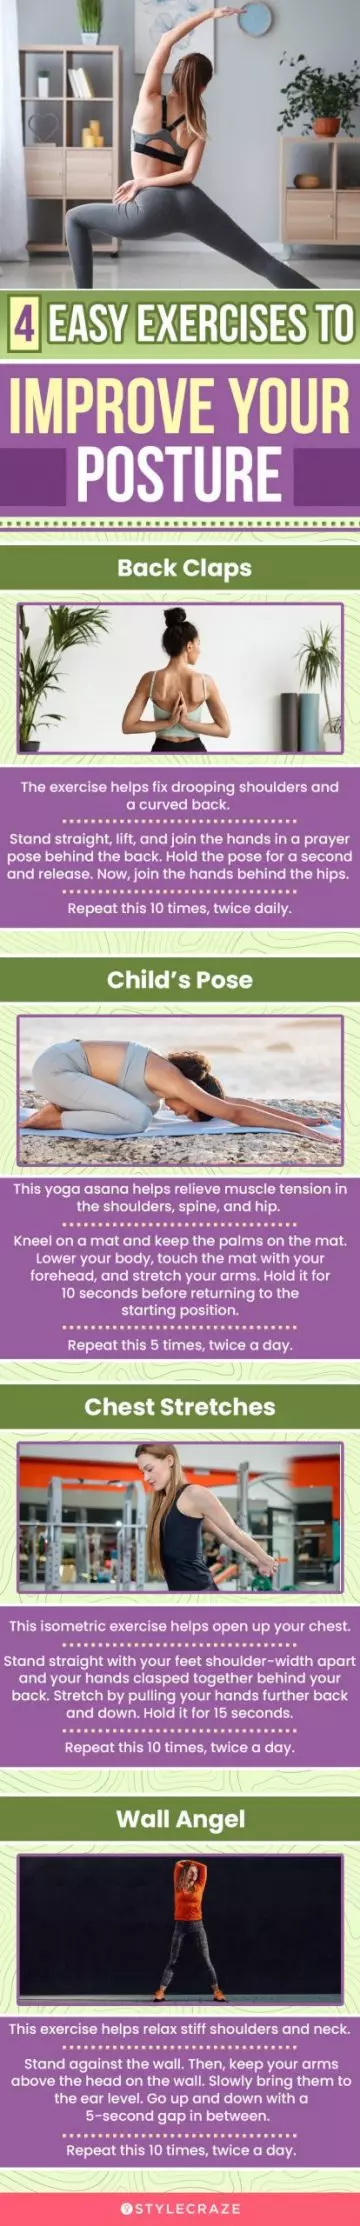 4 easy exercises to improve your posture (infographic)